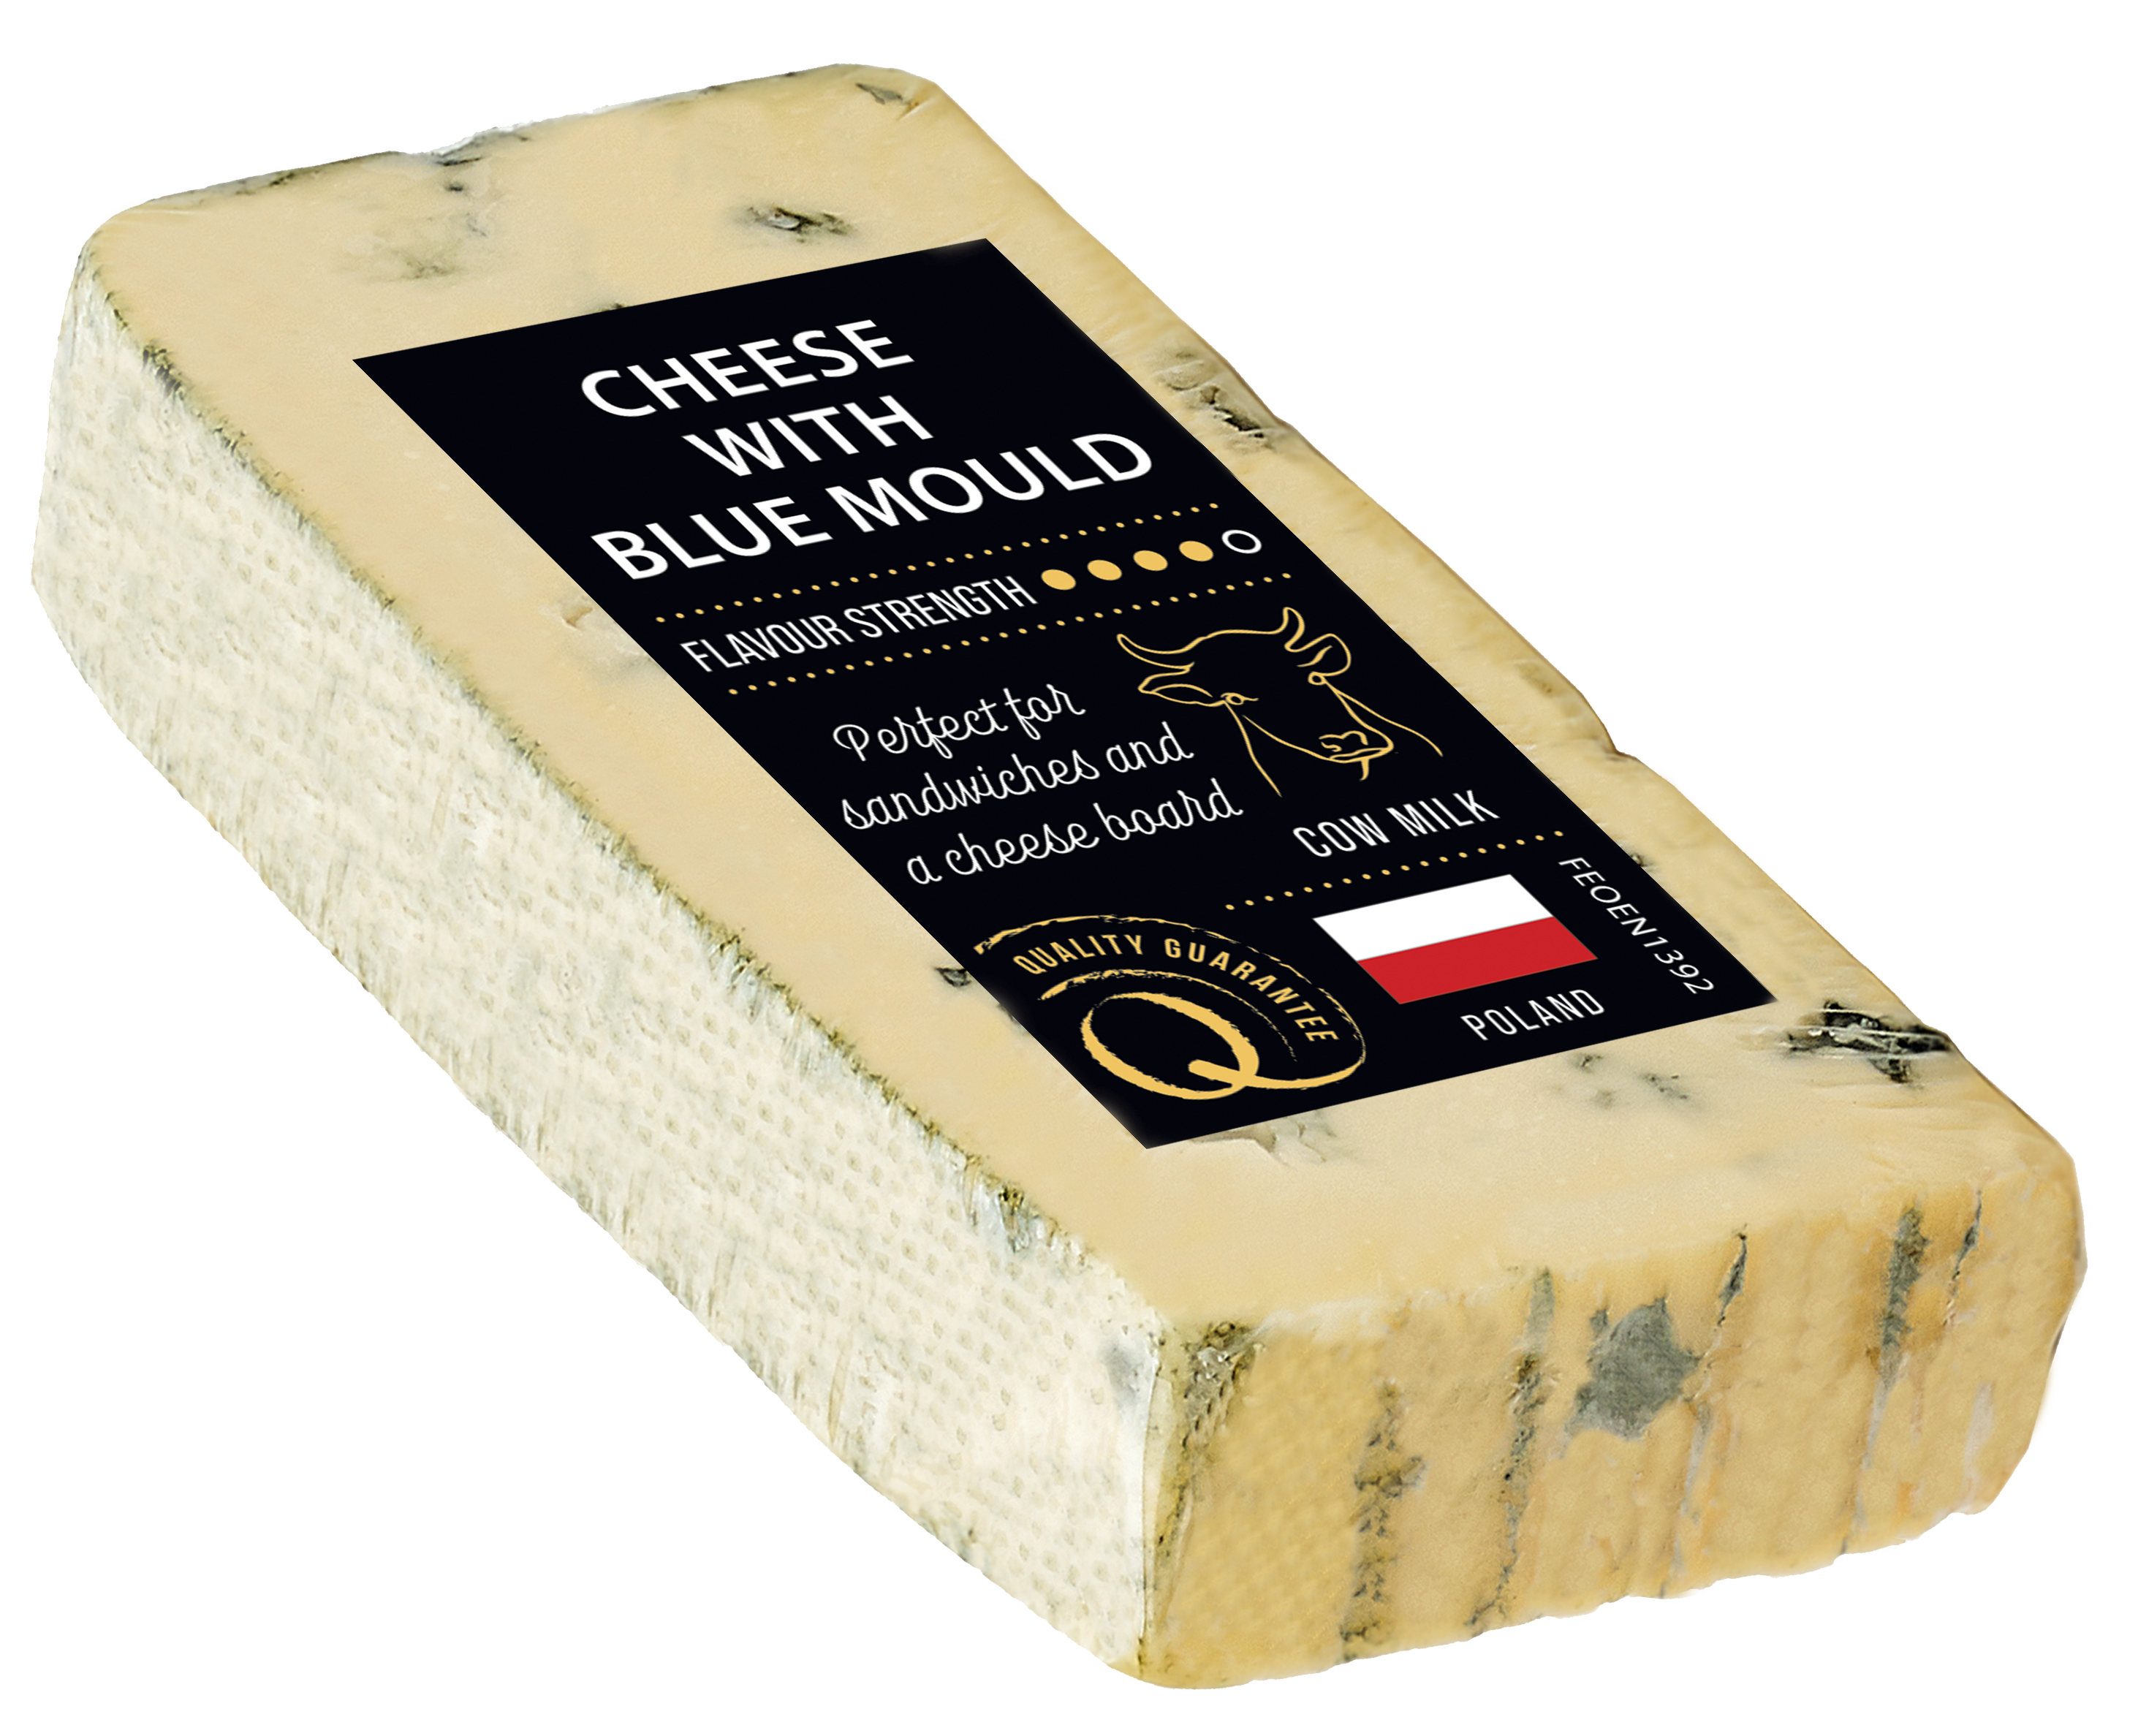 Cheese with Blue Mould